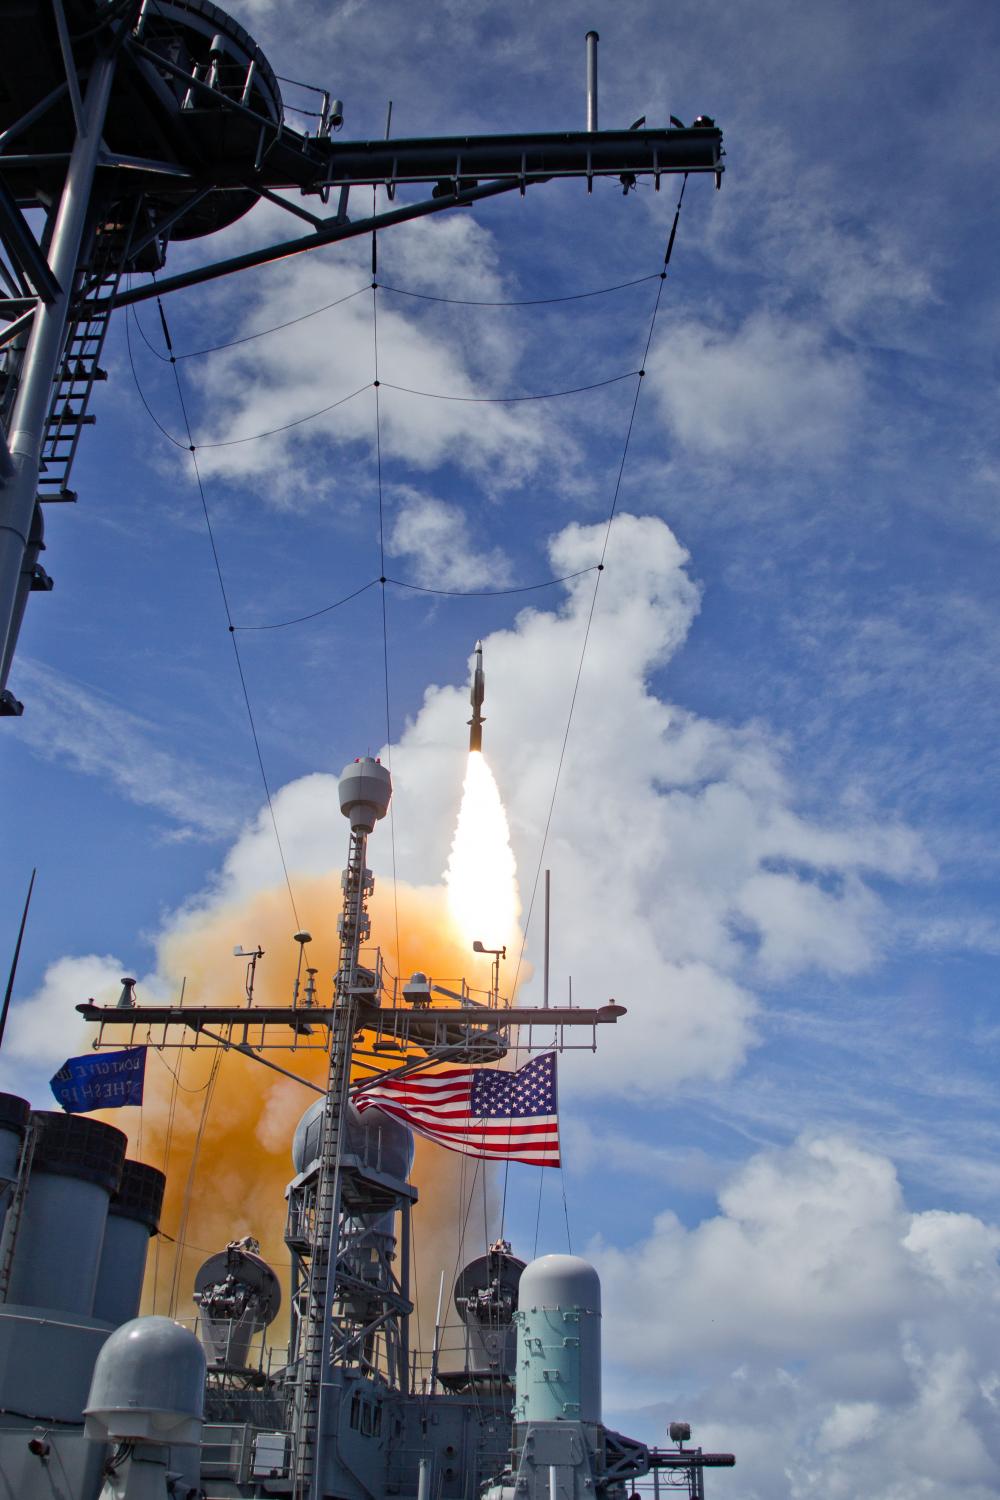 An SM-3 Block IB interceptor launches from the USS Lake Erie during a Missile Defense Agency test designed to hit a complex short-range ballistic missile target. (Photo: Missile Defense Agency)